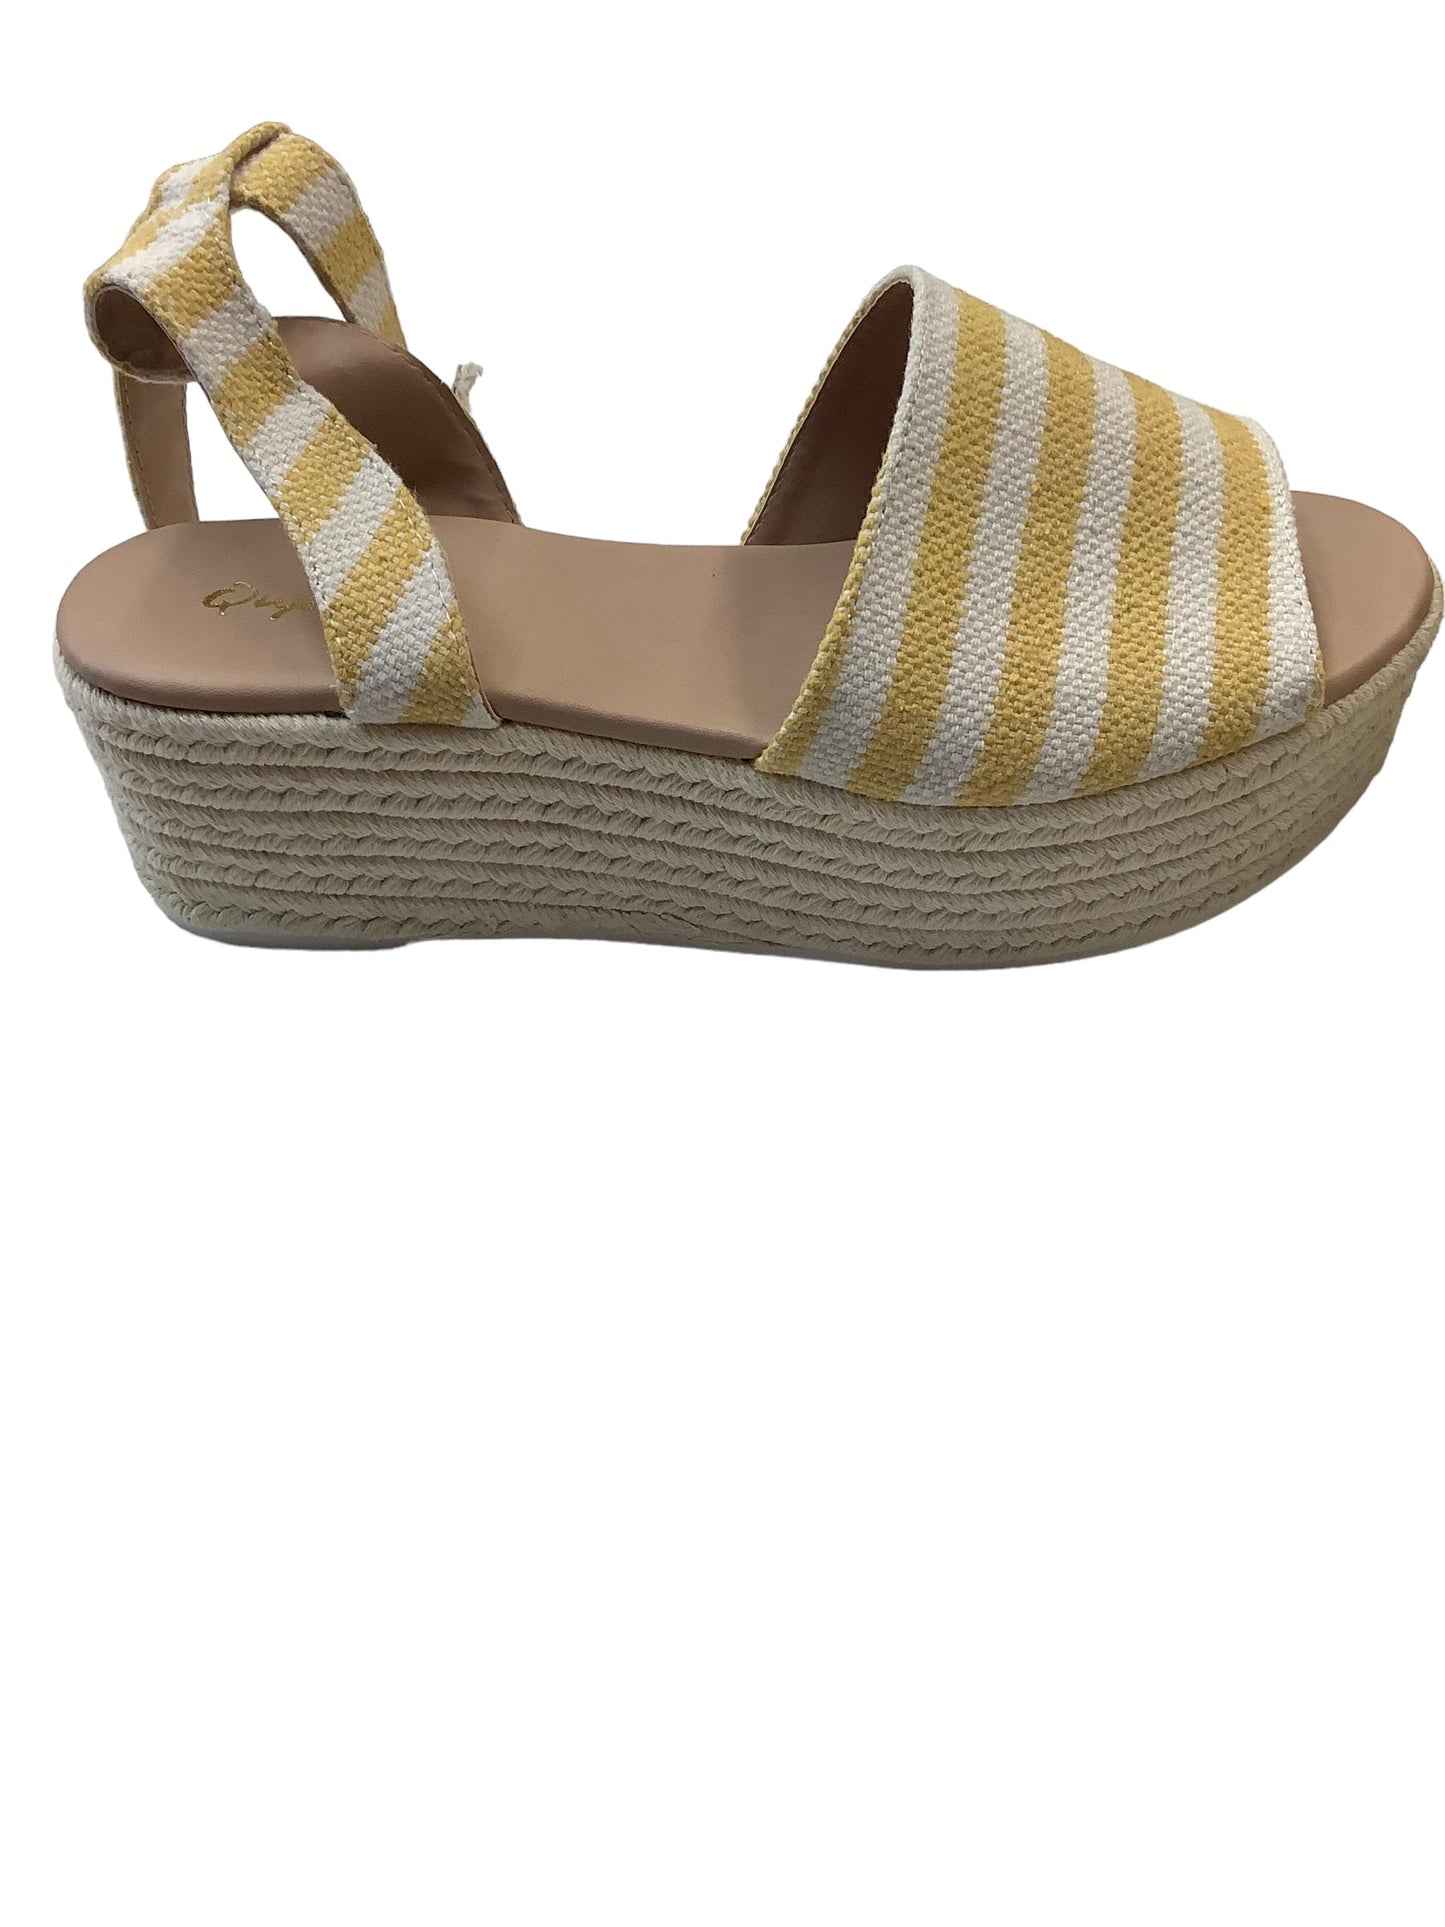 Shoes Heels Espadrille Wedge By Qupid  Size: 8